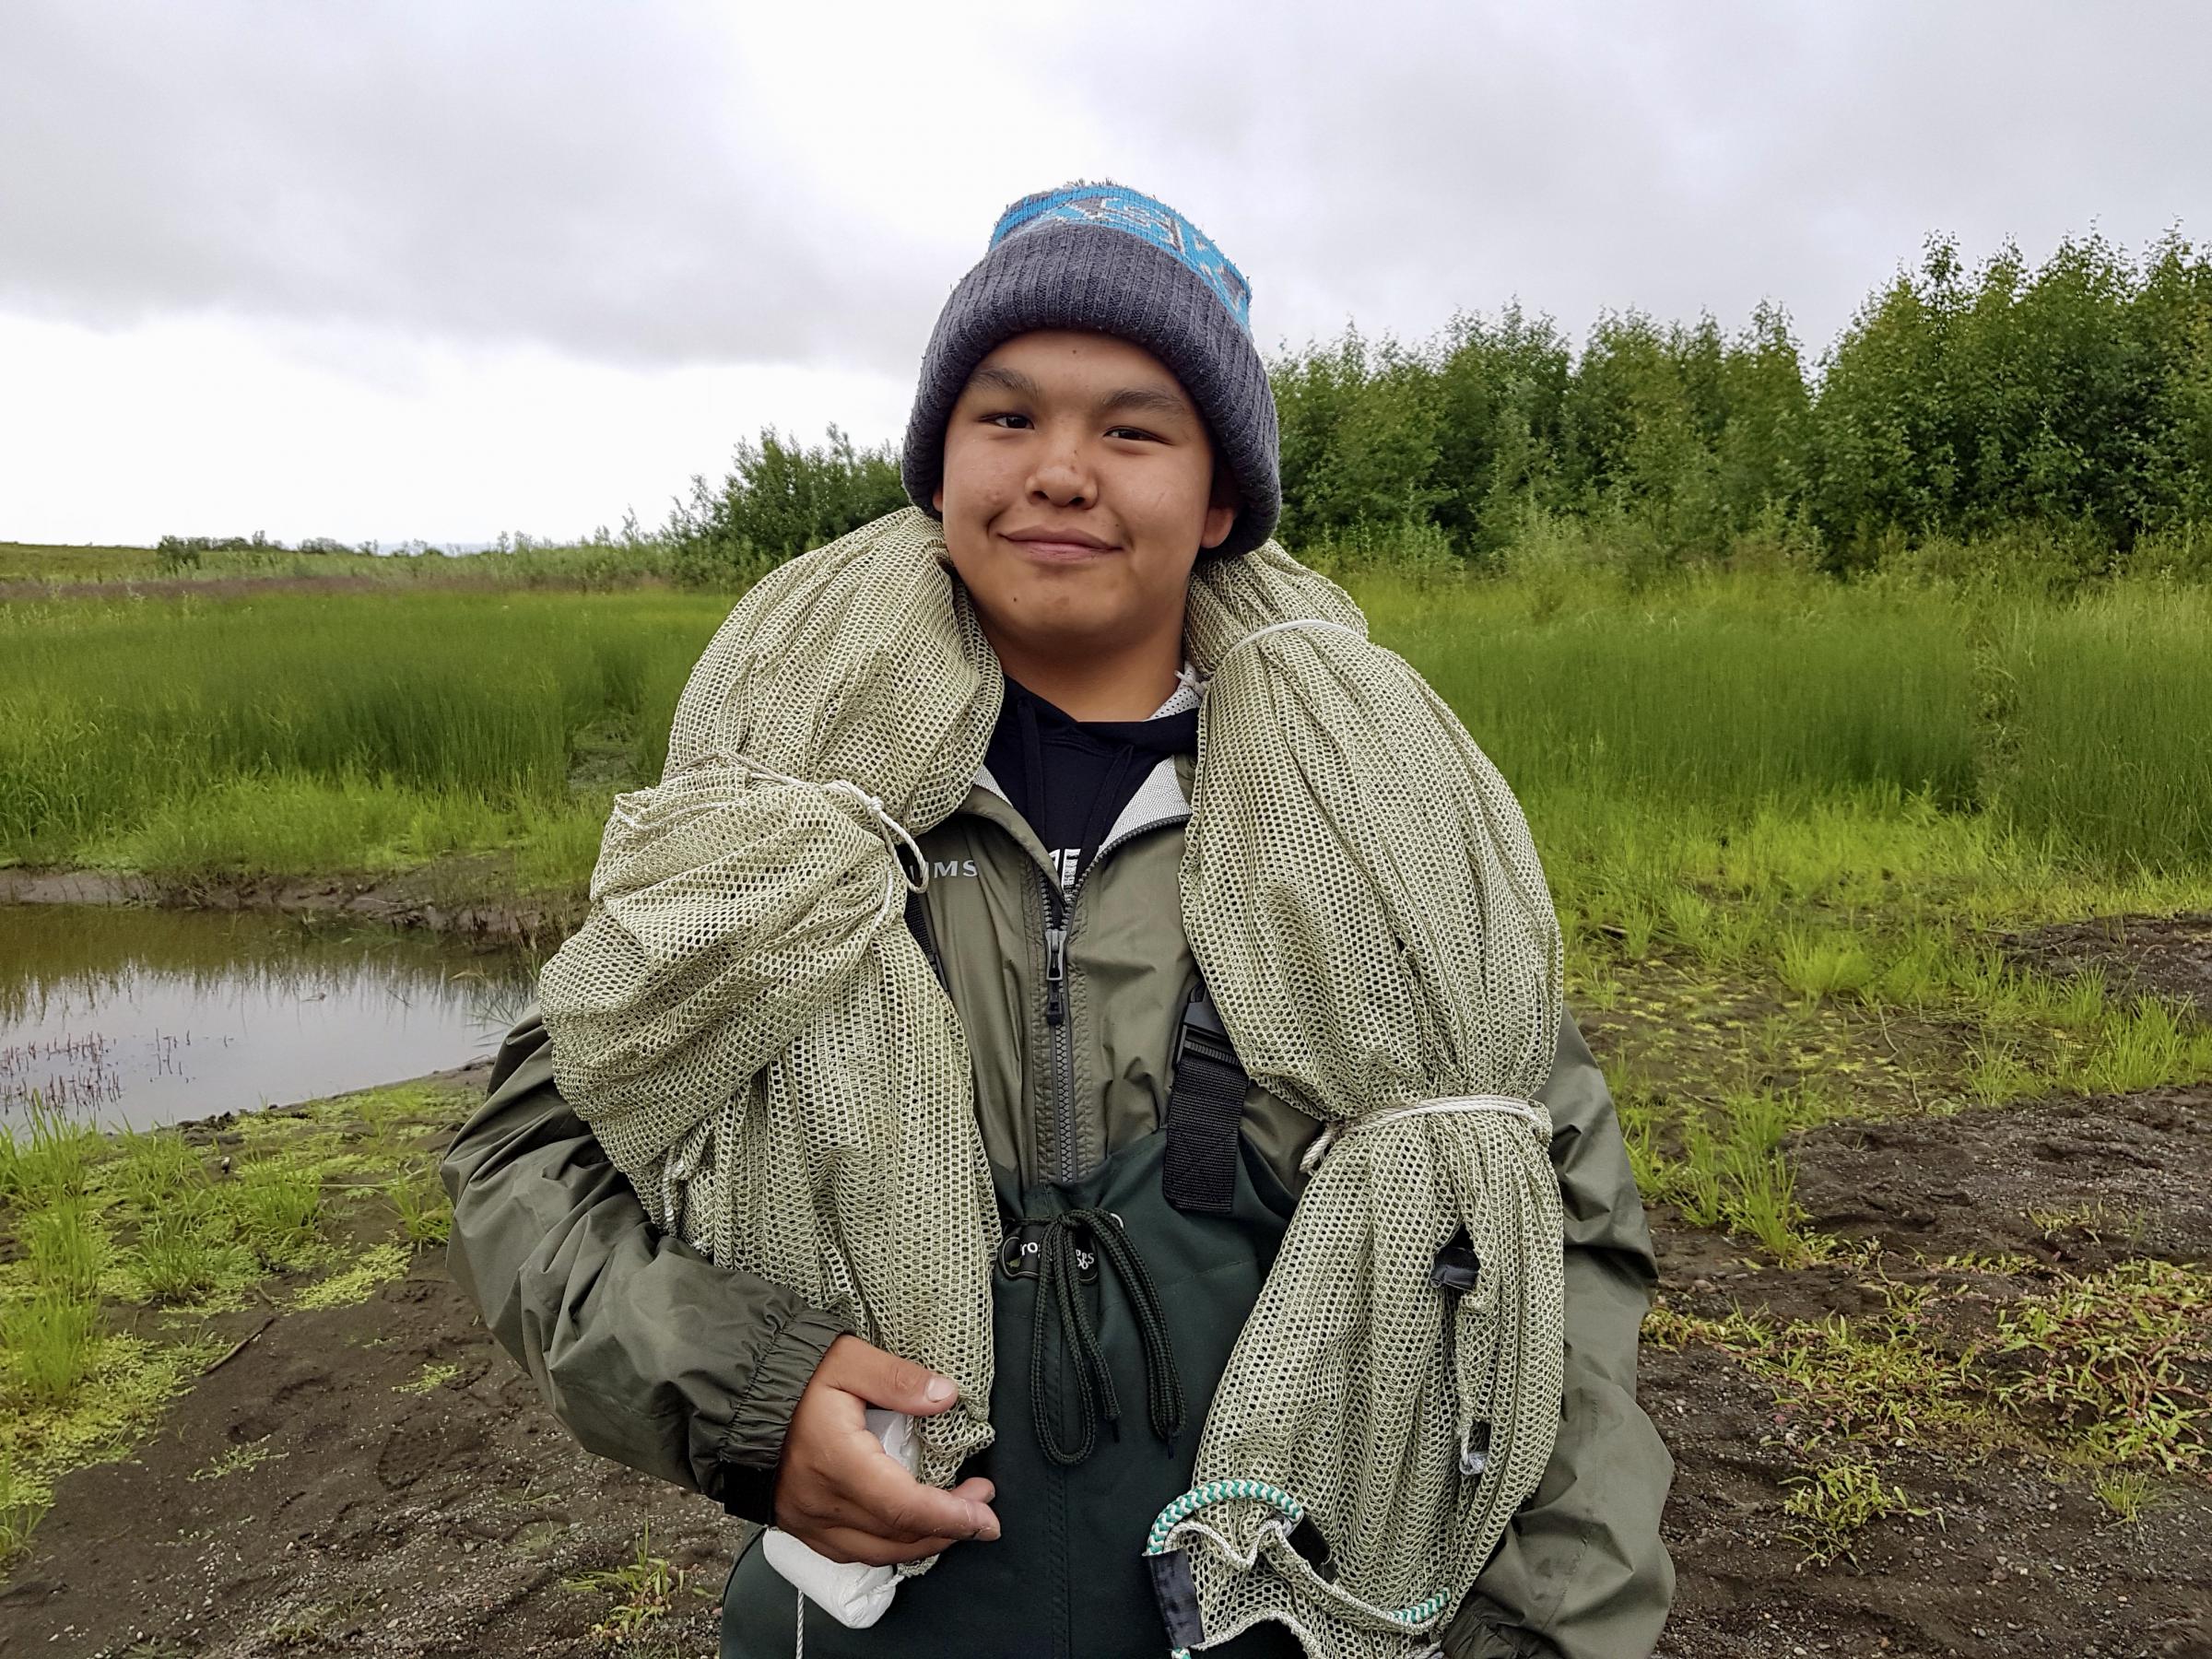 Orutsararmiut Native Council Summer Science and Culture camper Nicolai Chase, 16, gets ready to set up a beach seine net. (Photo by Christine Trudeau/KYUK)